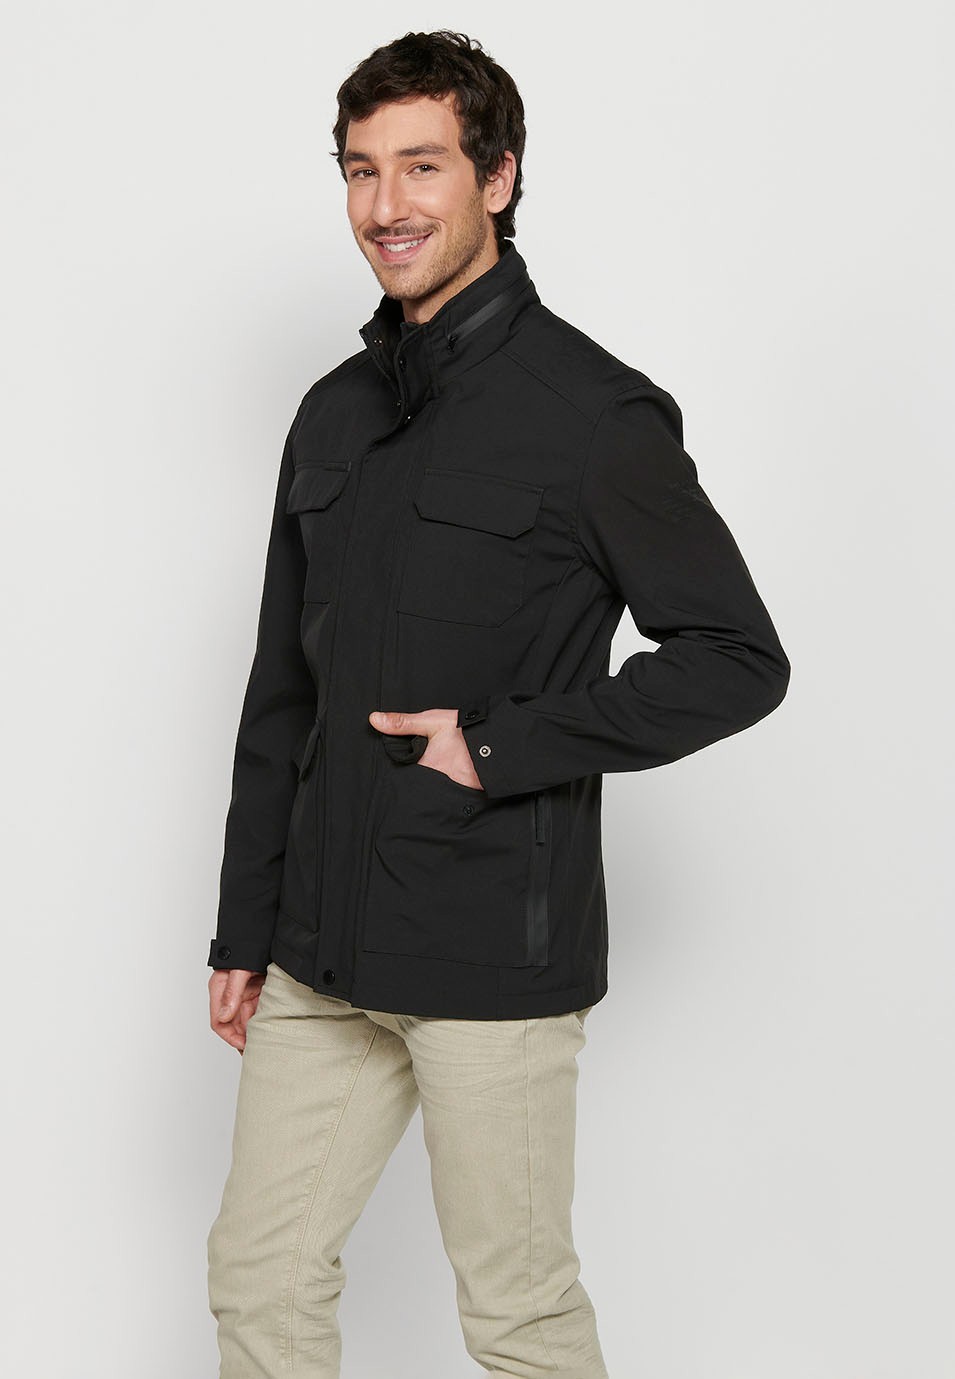 Long Black High Neck Windbreaker Jacket with Front Zipper Closure and Four Flap Pockets for Men